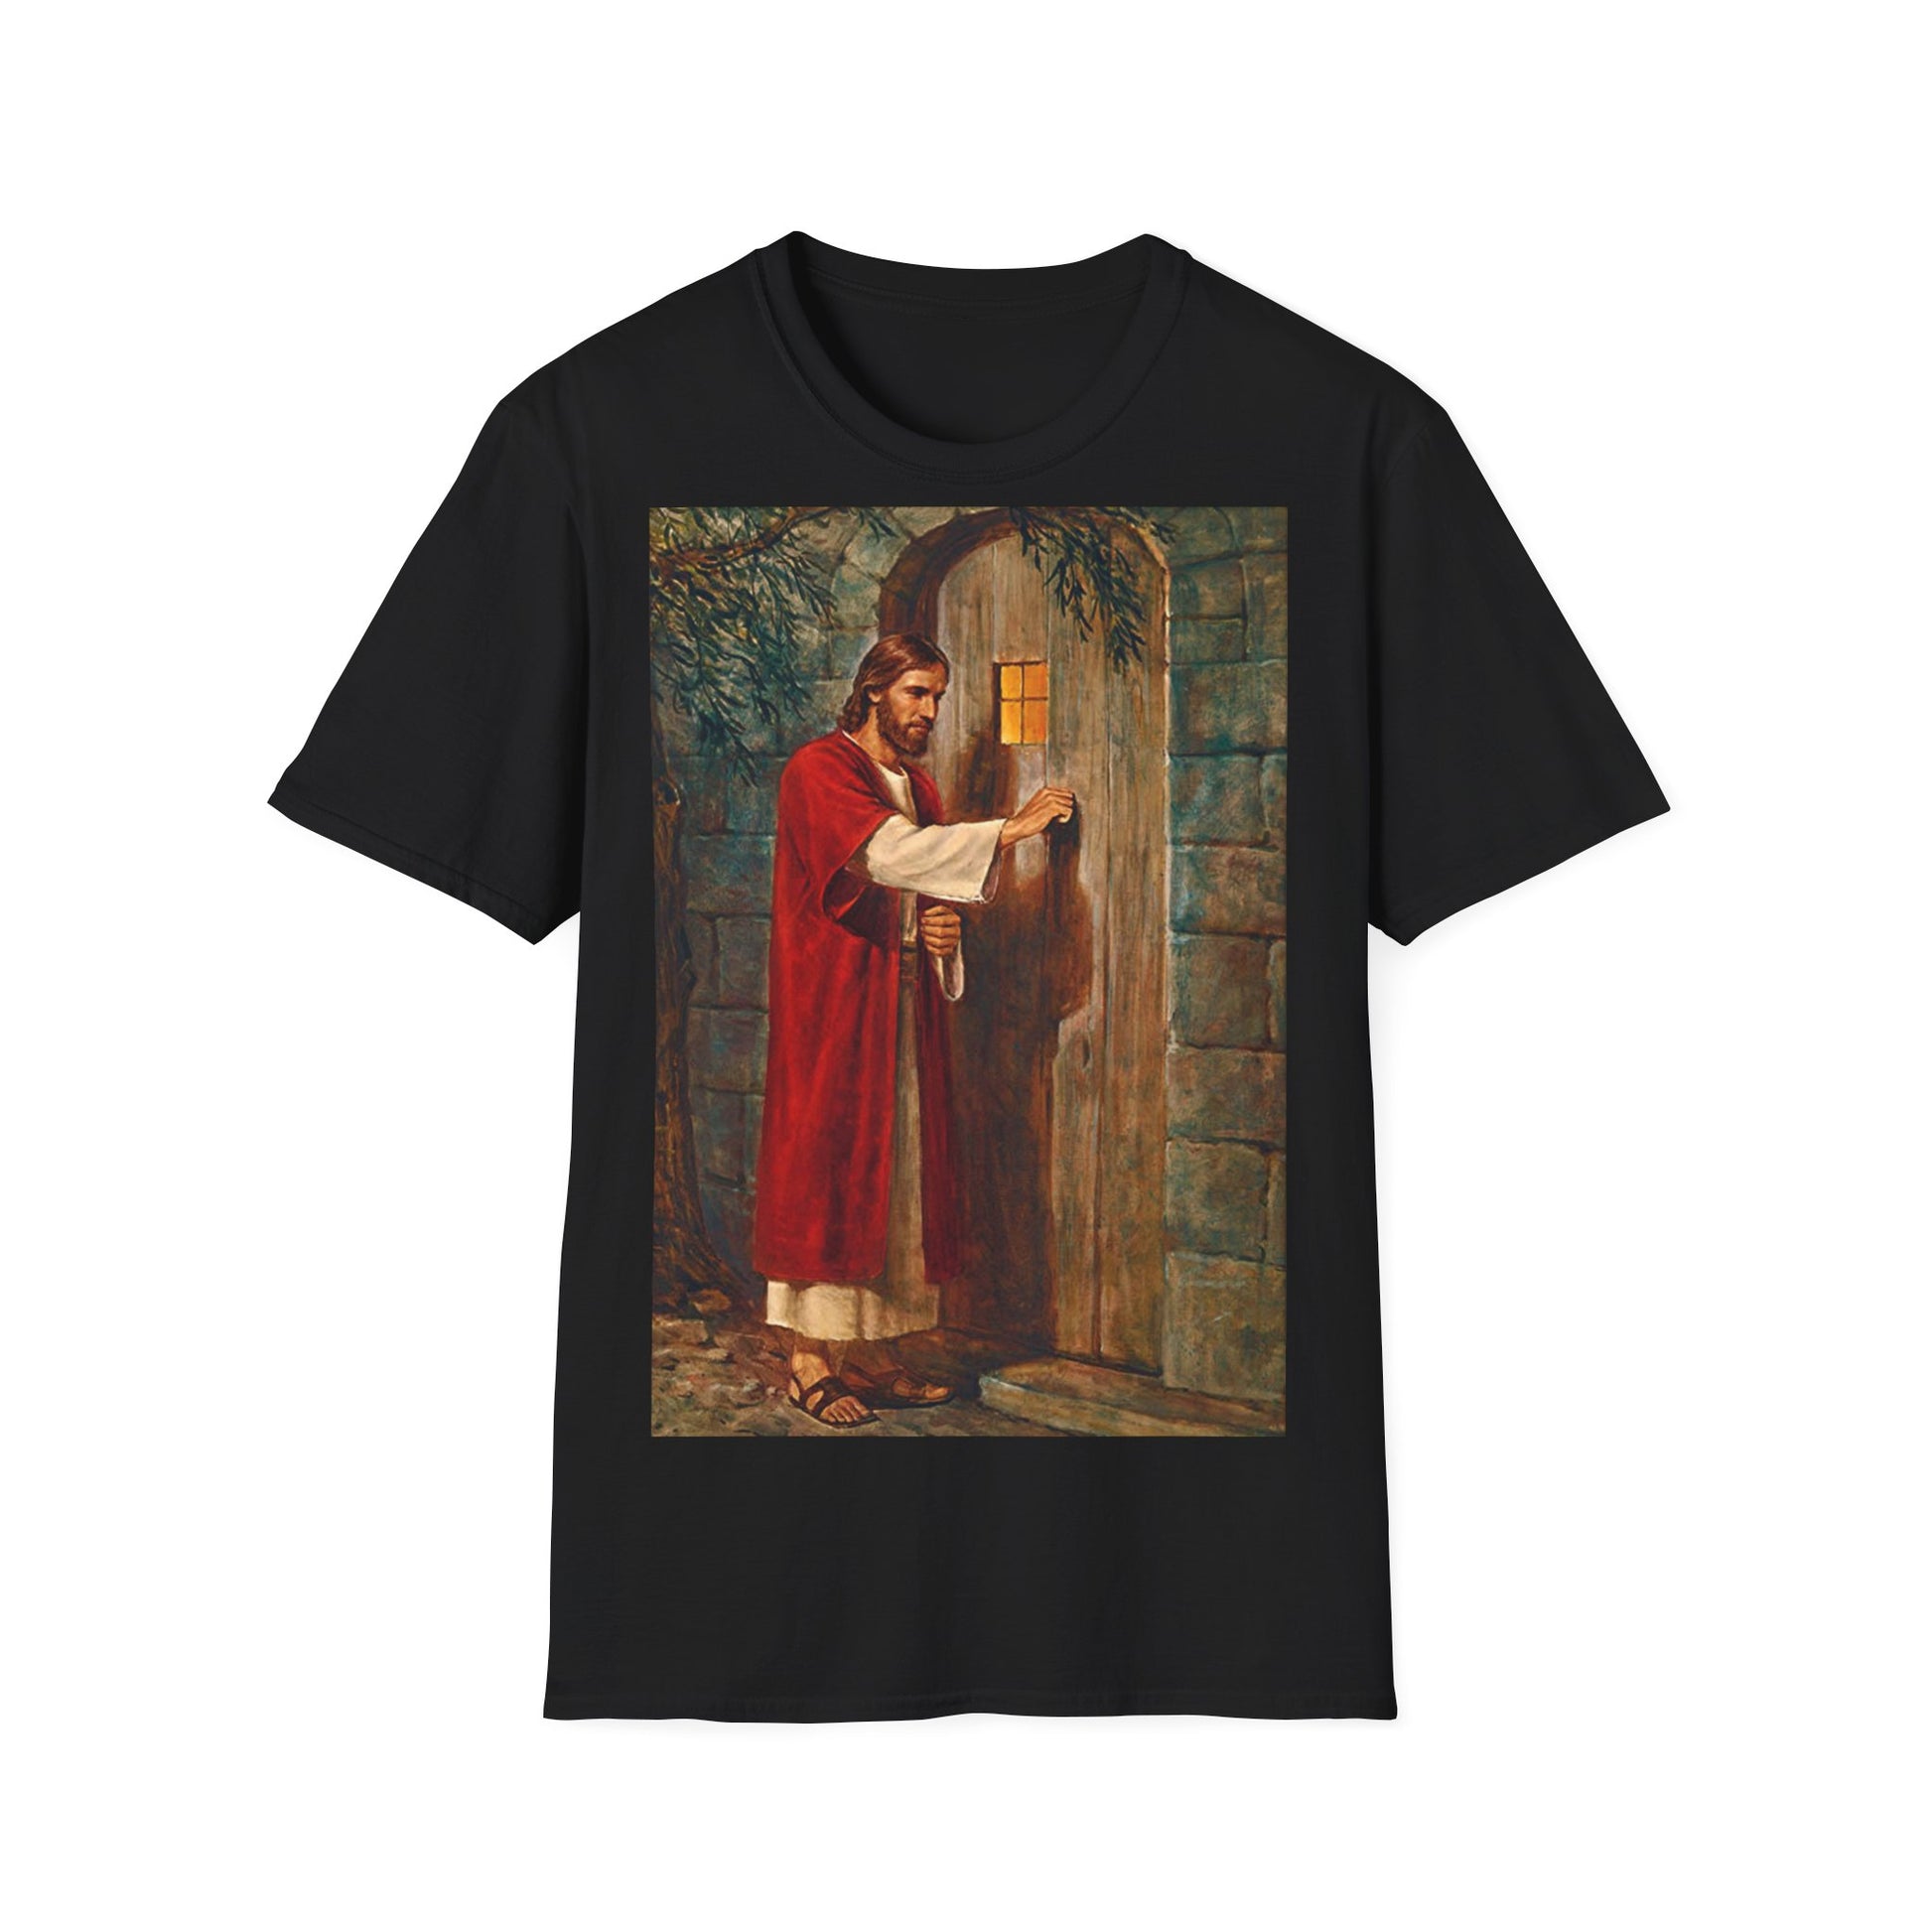 A black t-shirt with a classic painting of Jesus knocking at the door. He says 'Behold! I stand at the door and knock. If anyone hears my voice and opens the door, I will come in and dine with him, and him with me.' From Revelations 3:20